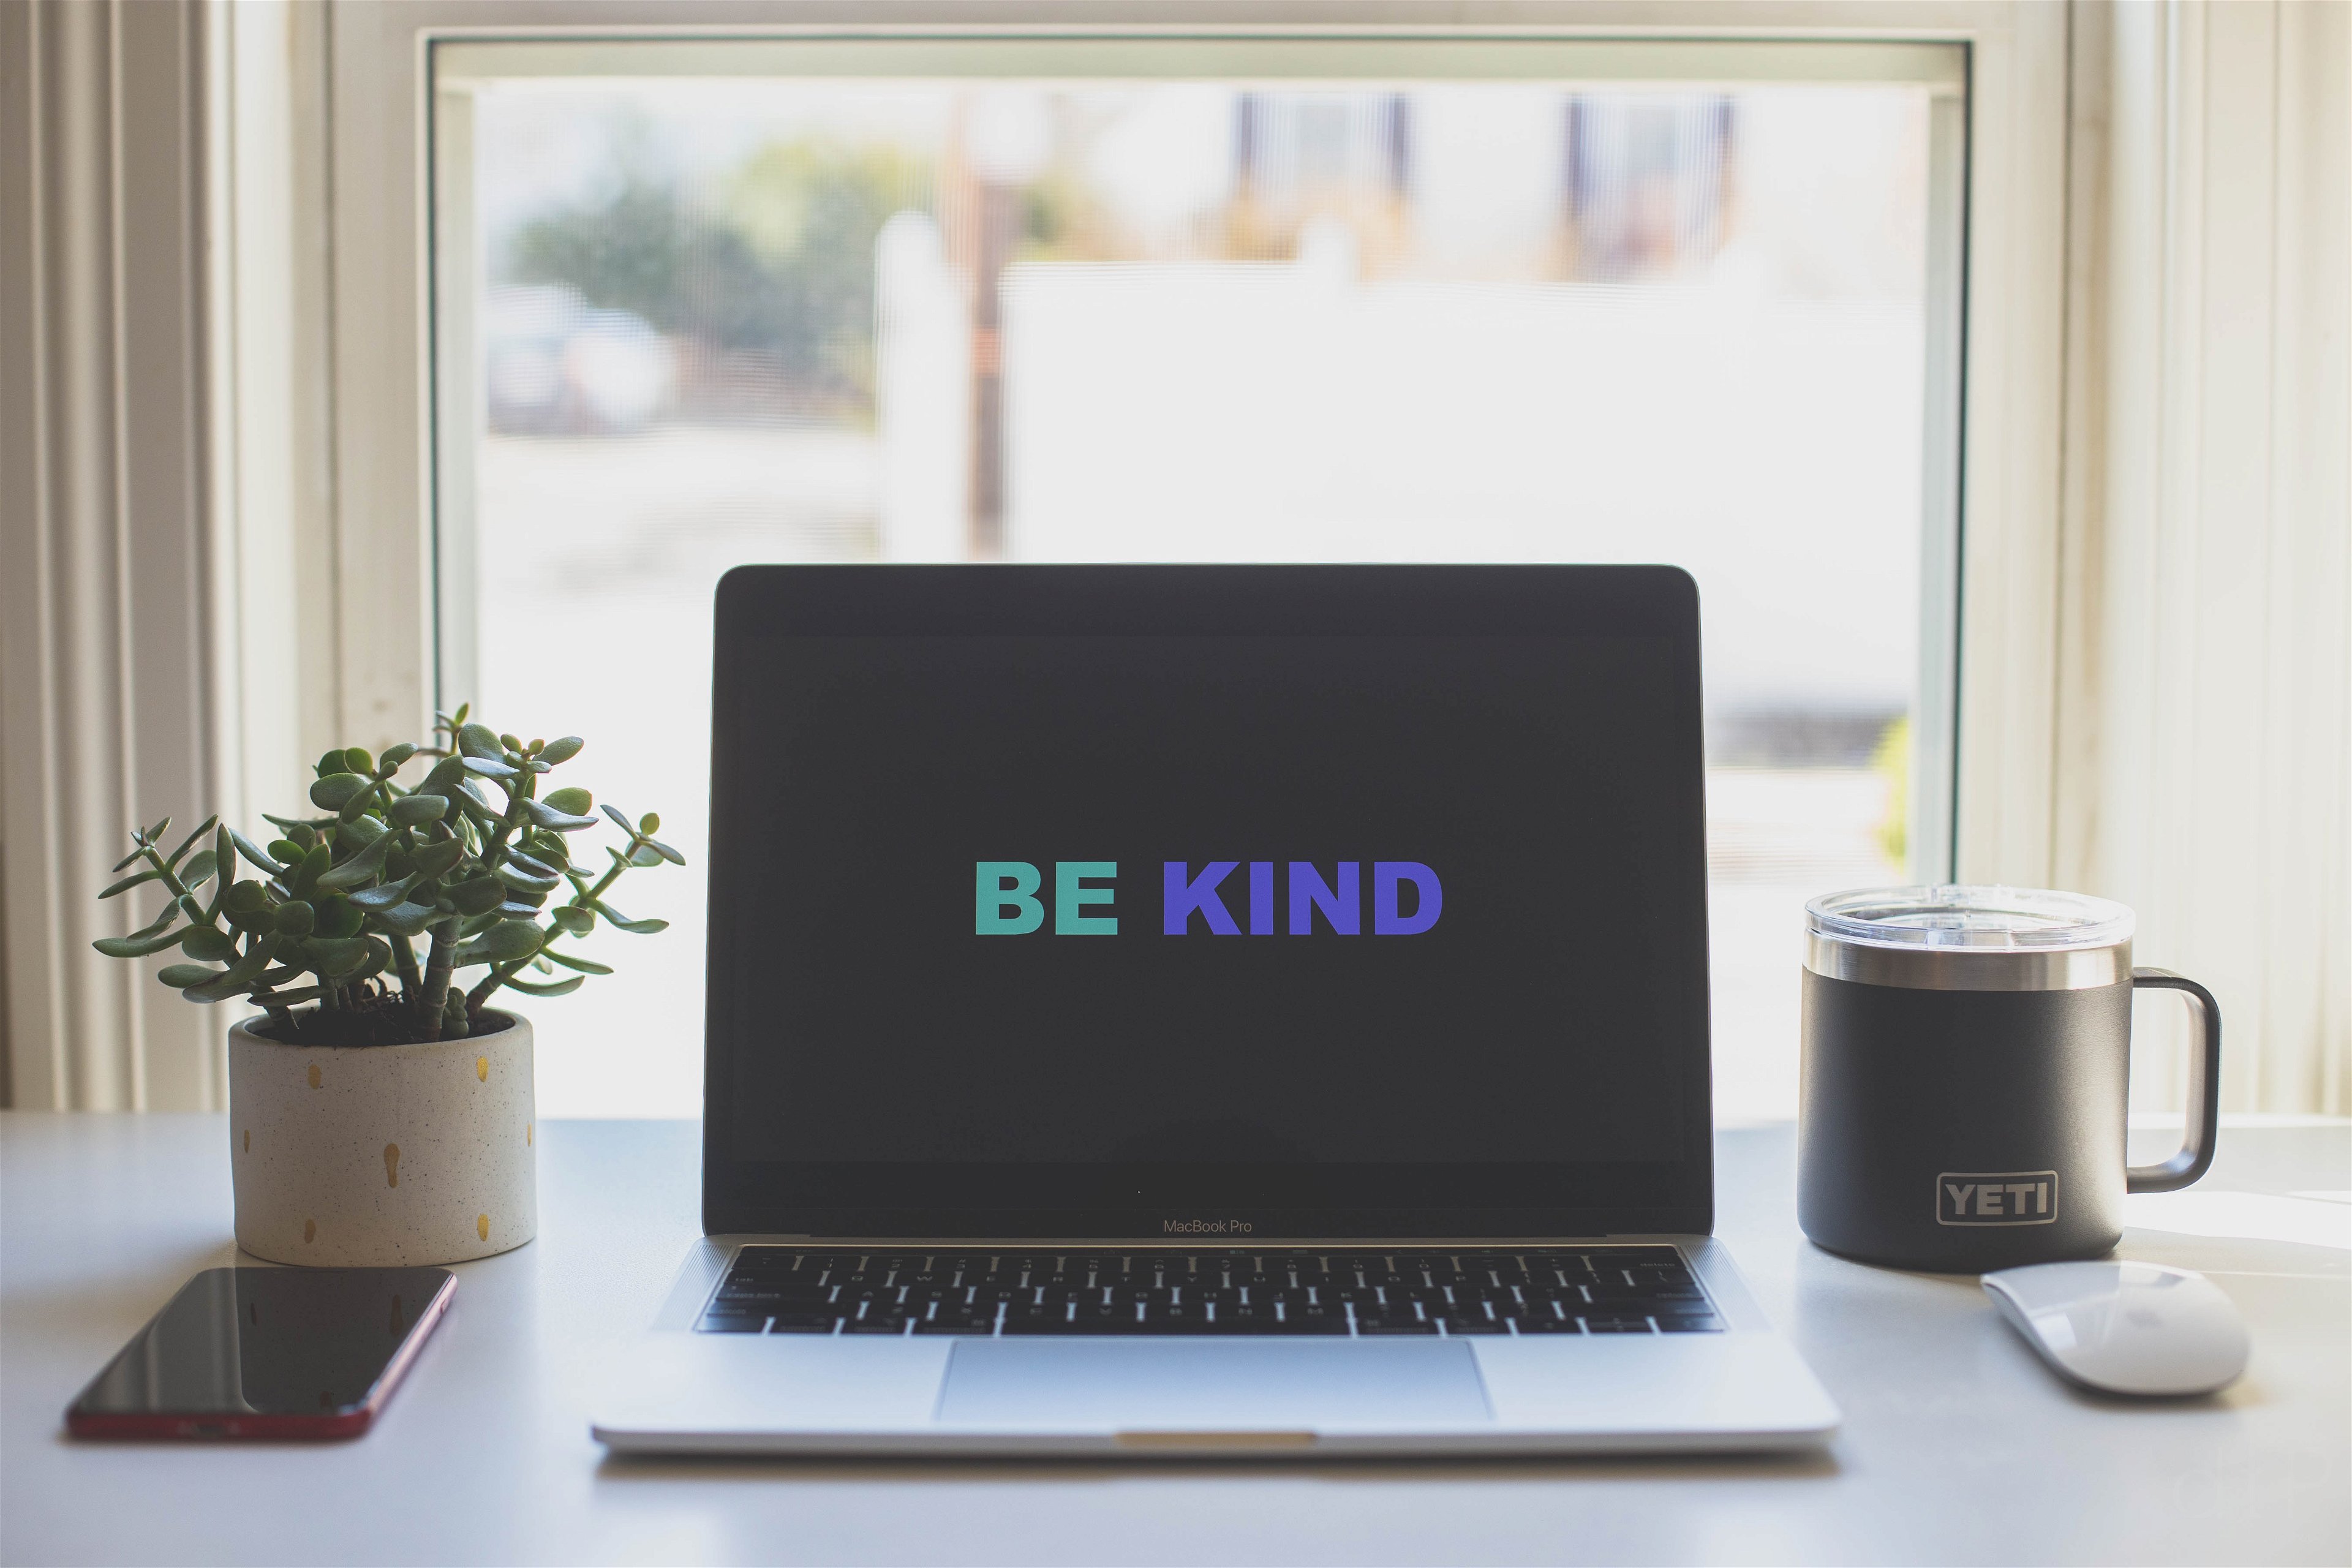 Leading with Kindness: Fundamentals - Why Lead with Kindness?